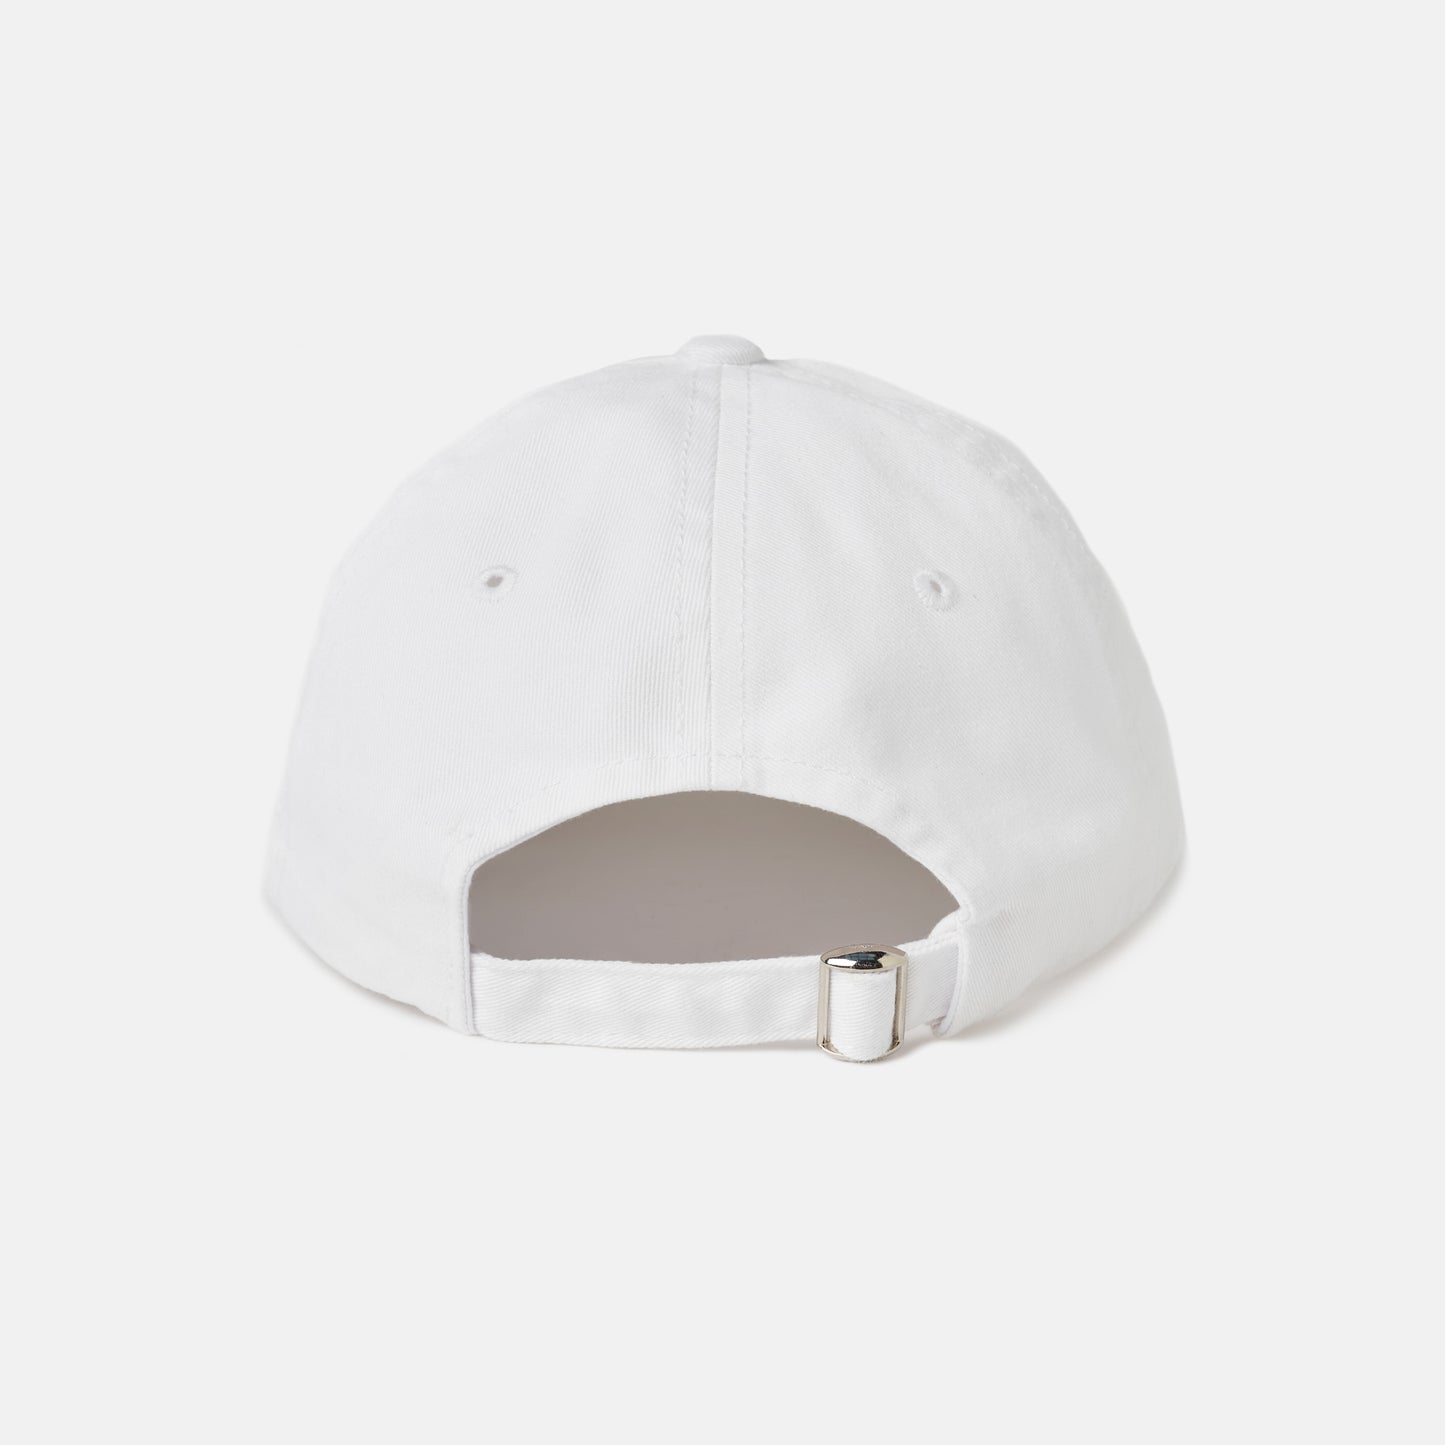 FLOWERBOY PROJECT EMBROIDERED LOGO DAD HAT | WHITE & LILAC - Back